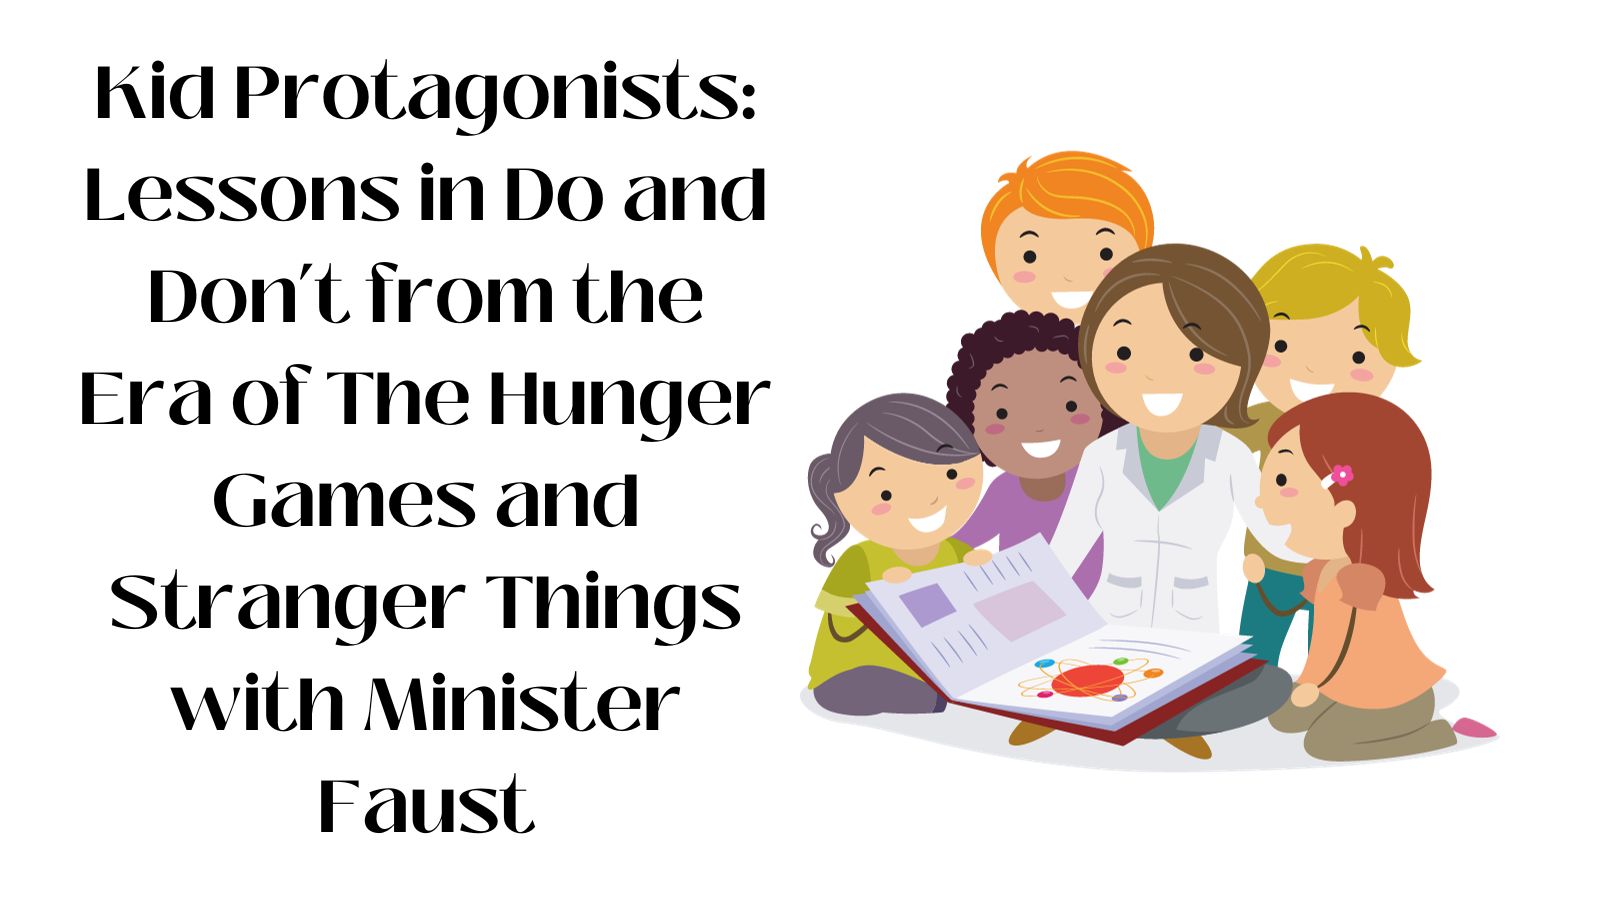 Kid Protagonists: Lessons in Do and Don’t from the Era of The Hunger Games and Stranger Things with Minister Faust